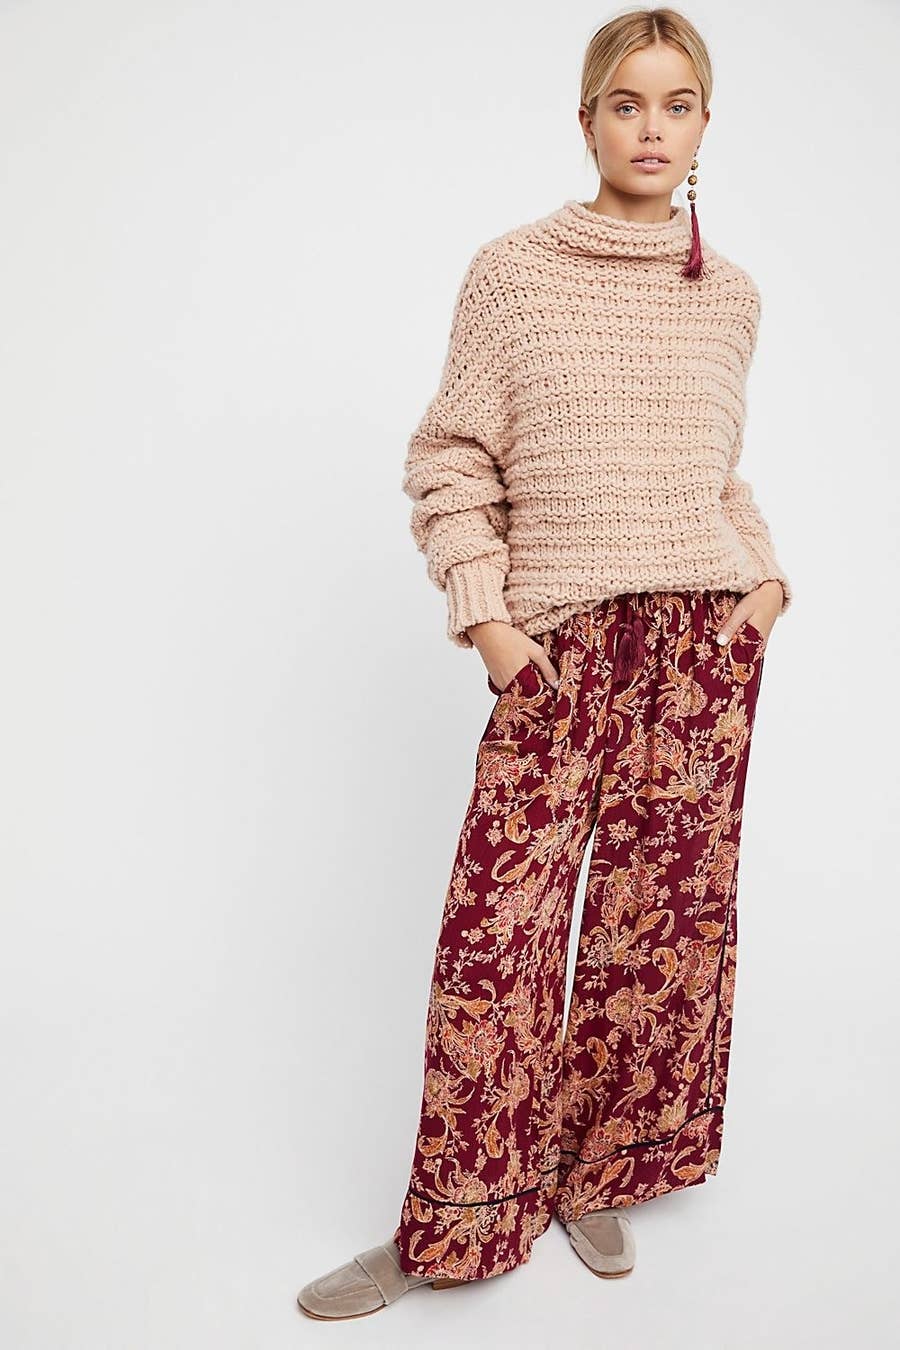 45 Things From Free People That Are Actually Worth Your Money